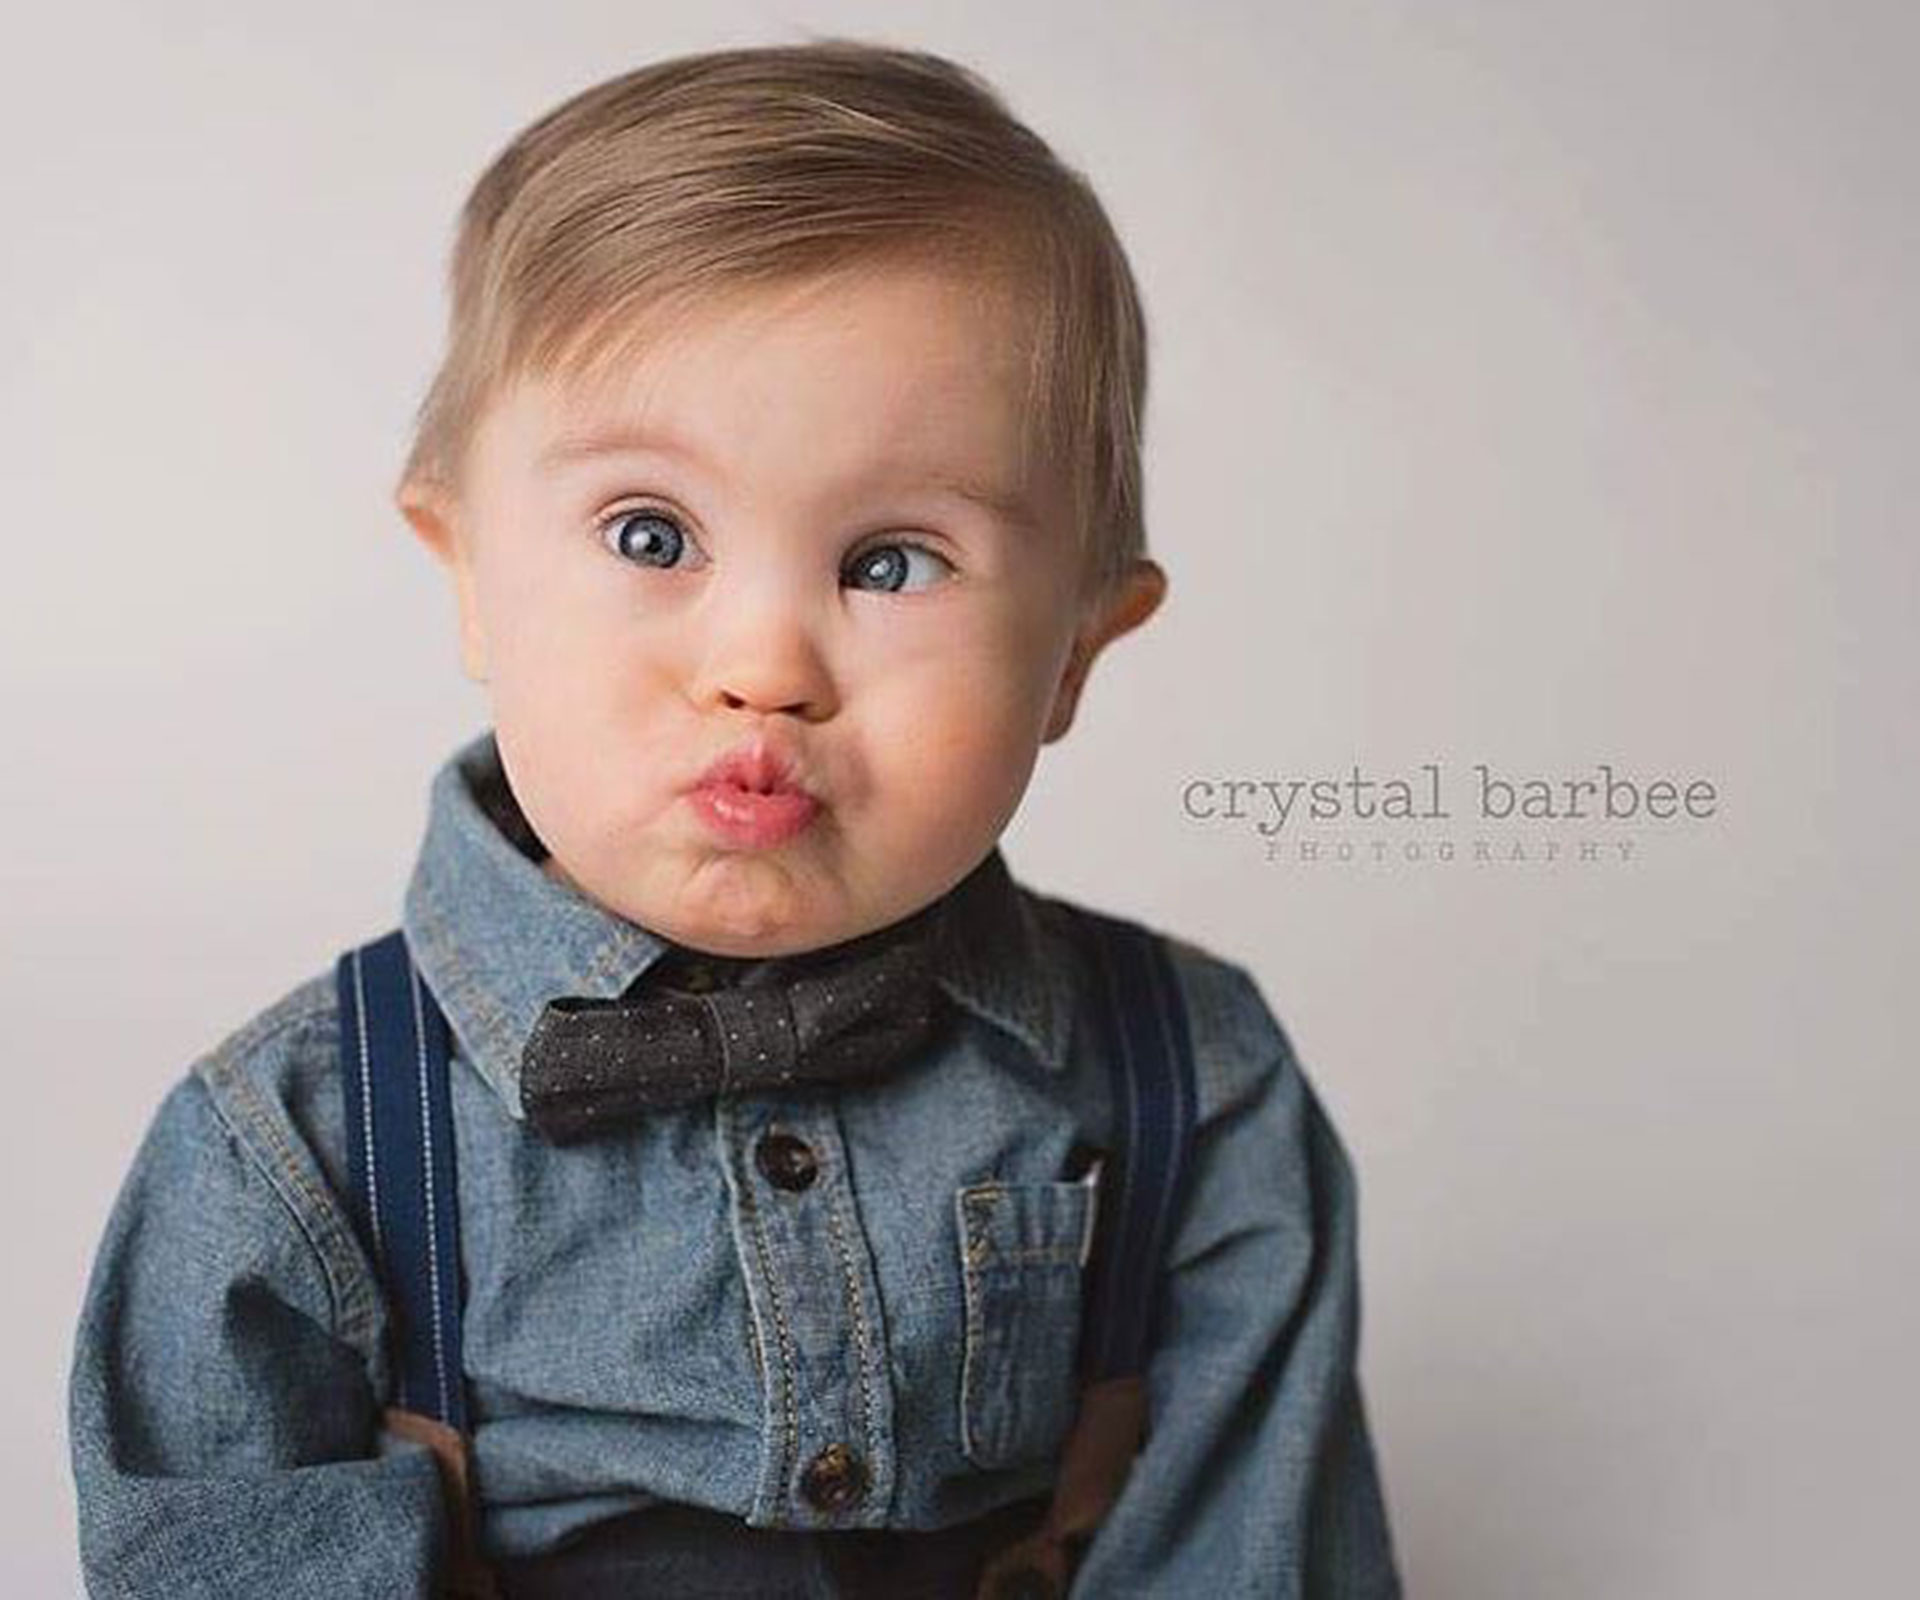 Down syndrome baby wins modelling contract after viral campaign